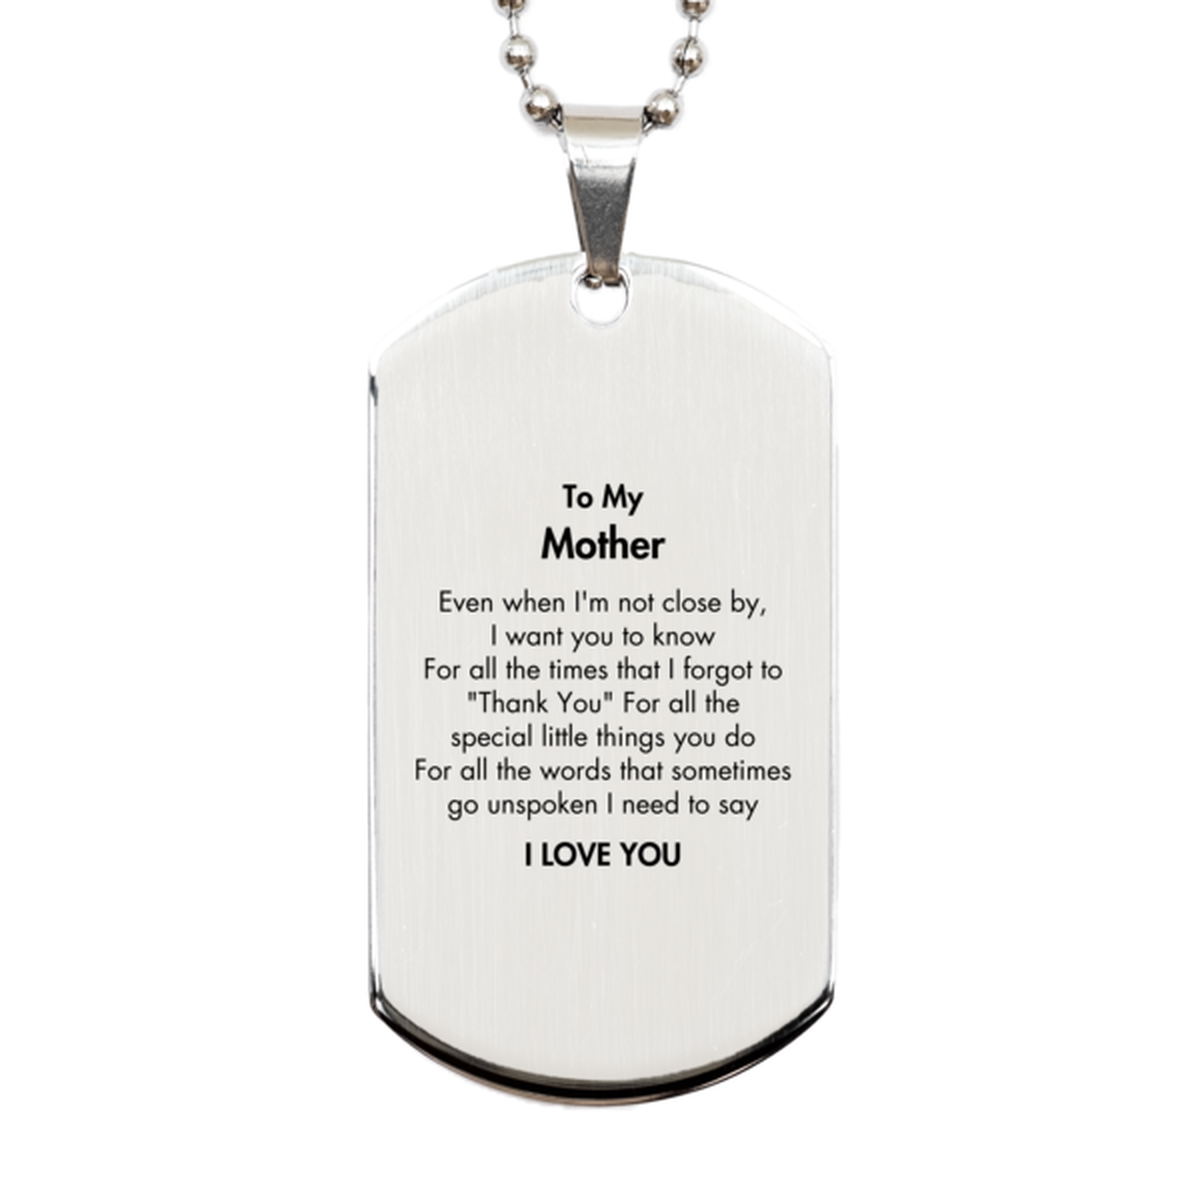 Thank You Gifts for Mother, Keepsake Silver Dog Tag Gifts for Mother Birthday Mother's day Father's Day Mother For all the words That sometimes go unspoken I need to say I LOVE YOU